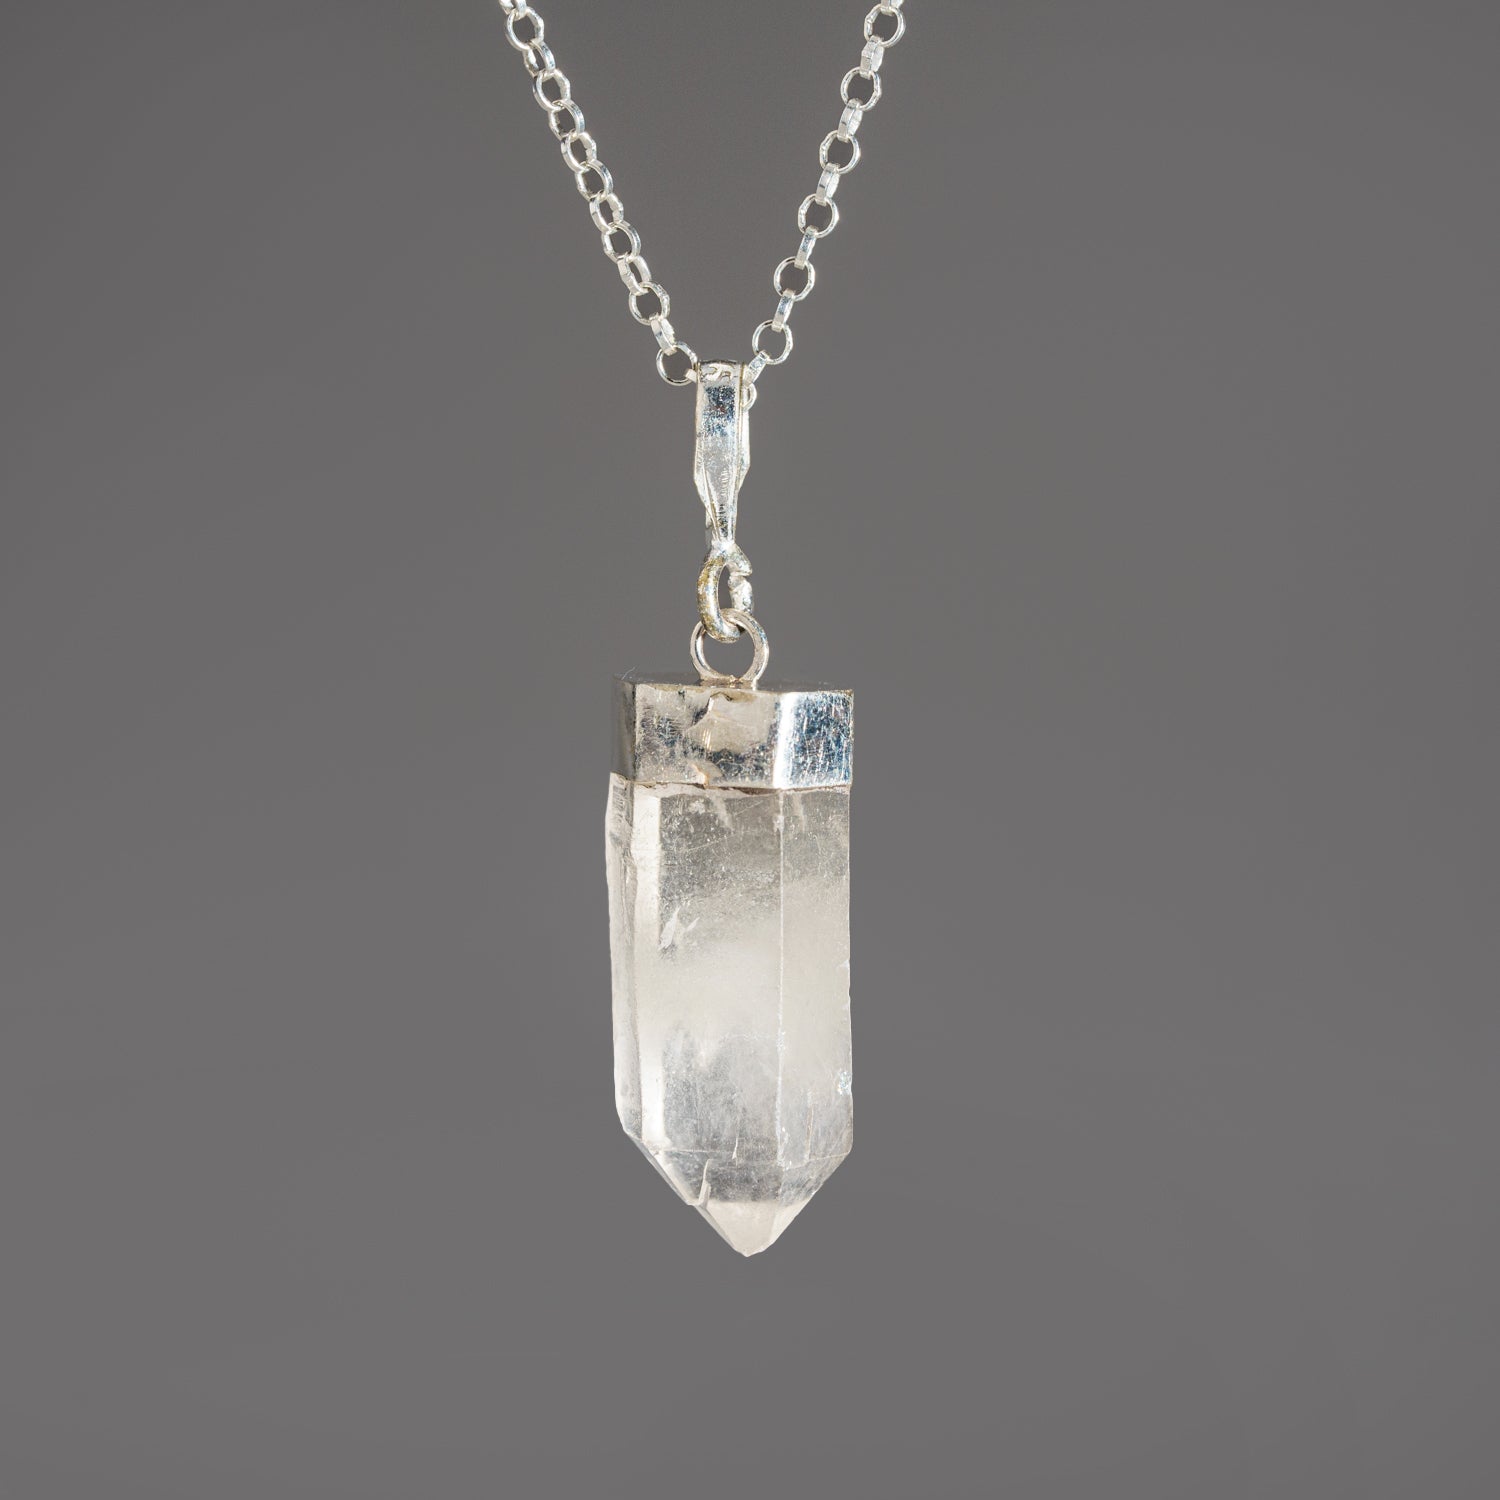 Genuine Clear Quartz Crystal Pendant (3-5 grams) with 18" Sterling Silver Chain